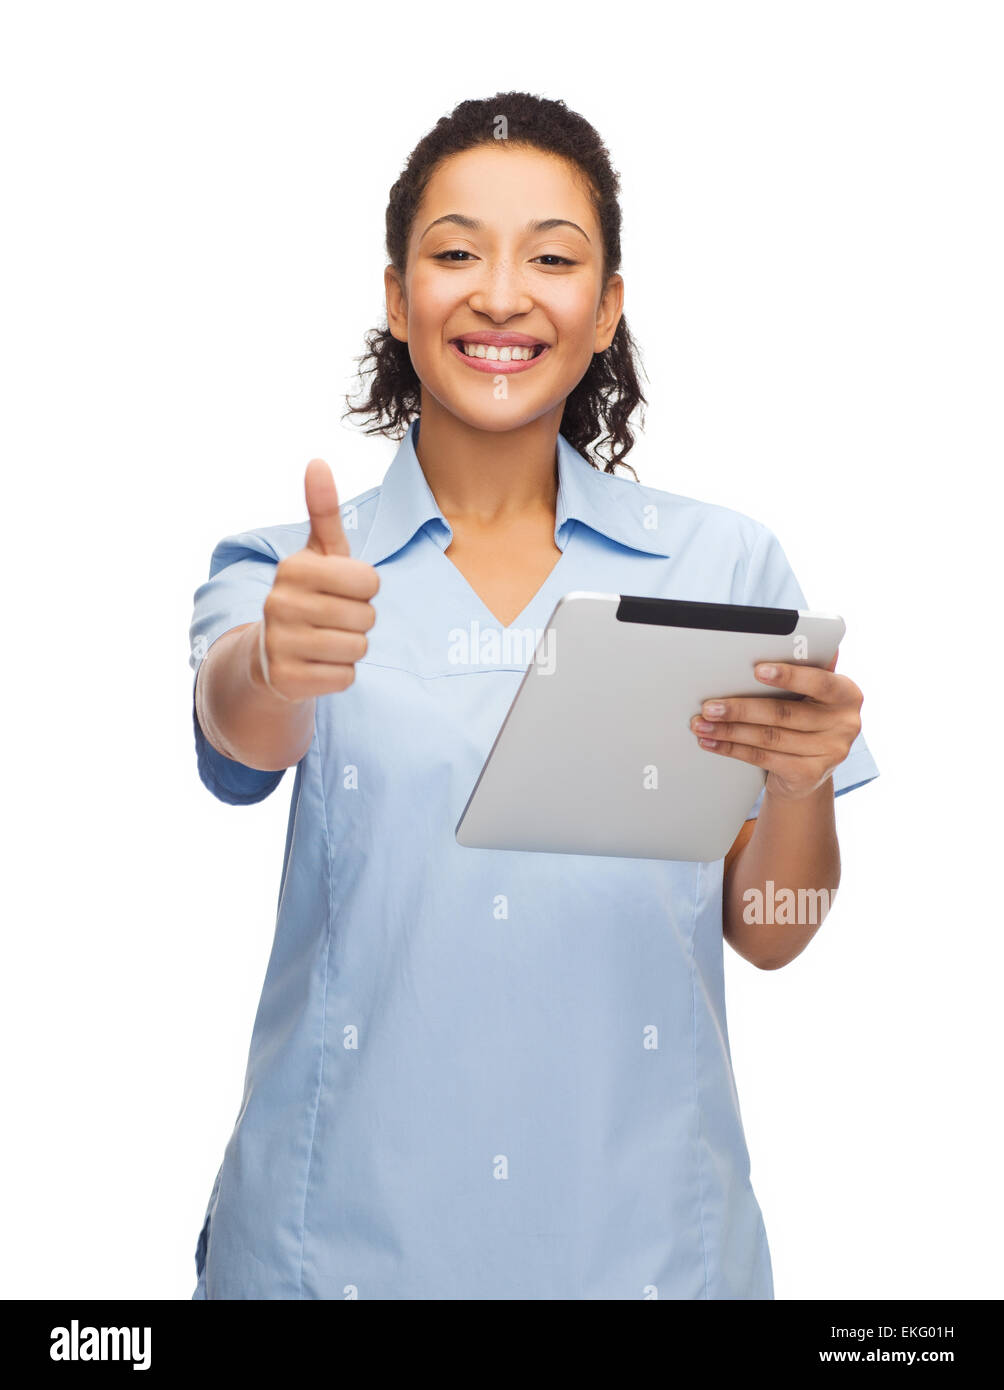 smiling black doctor or nurse with tablet pc Stock Photo